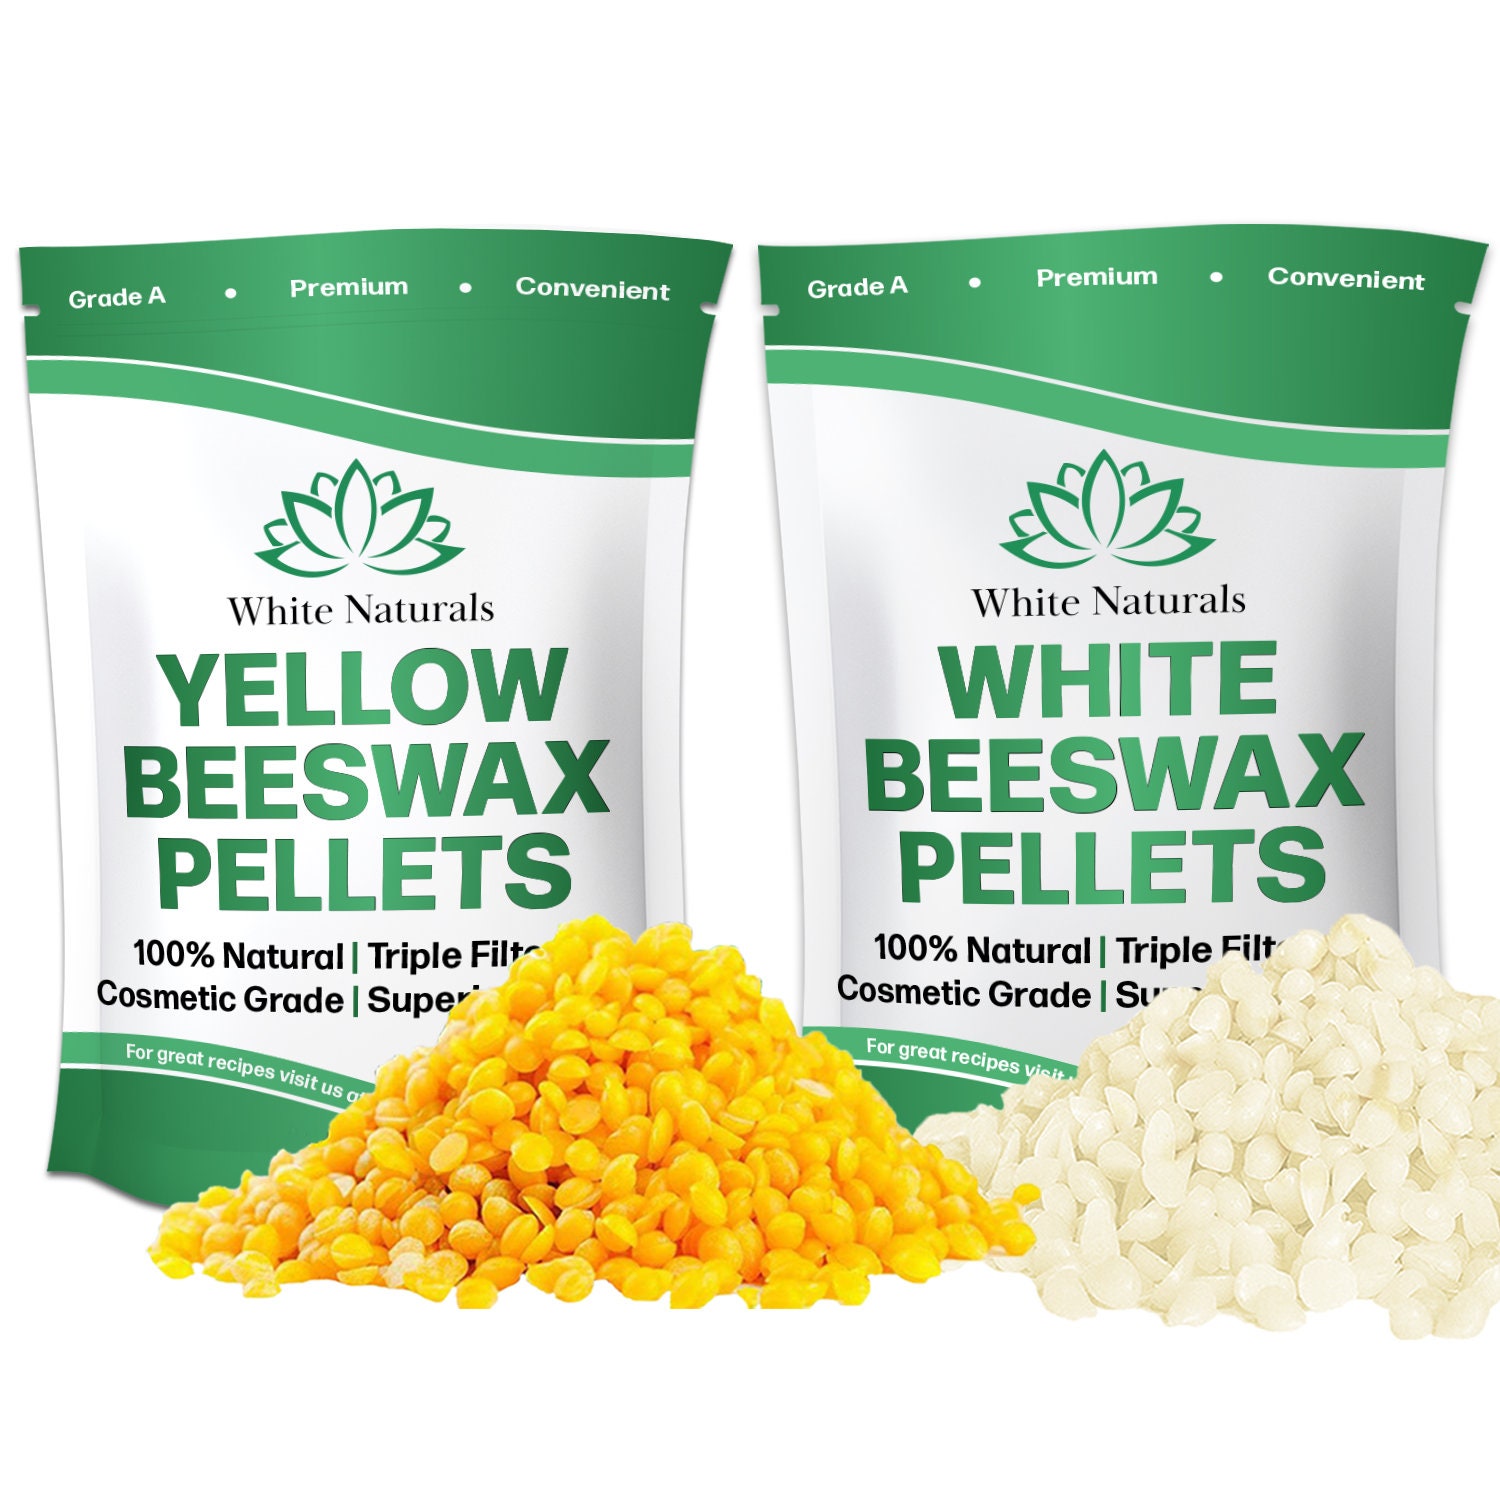 Organic Yellow Beeswax Pellets 8 Oz, Bees Wax Pesticide-free